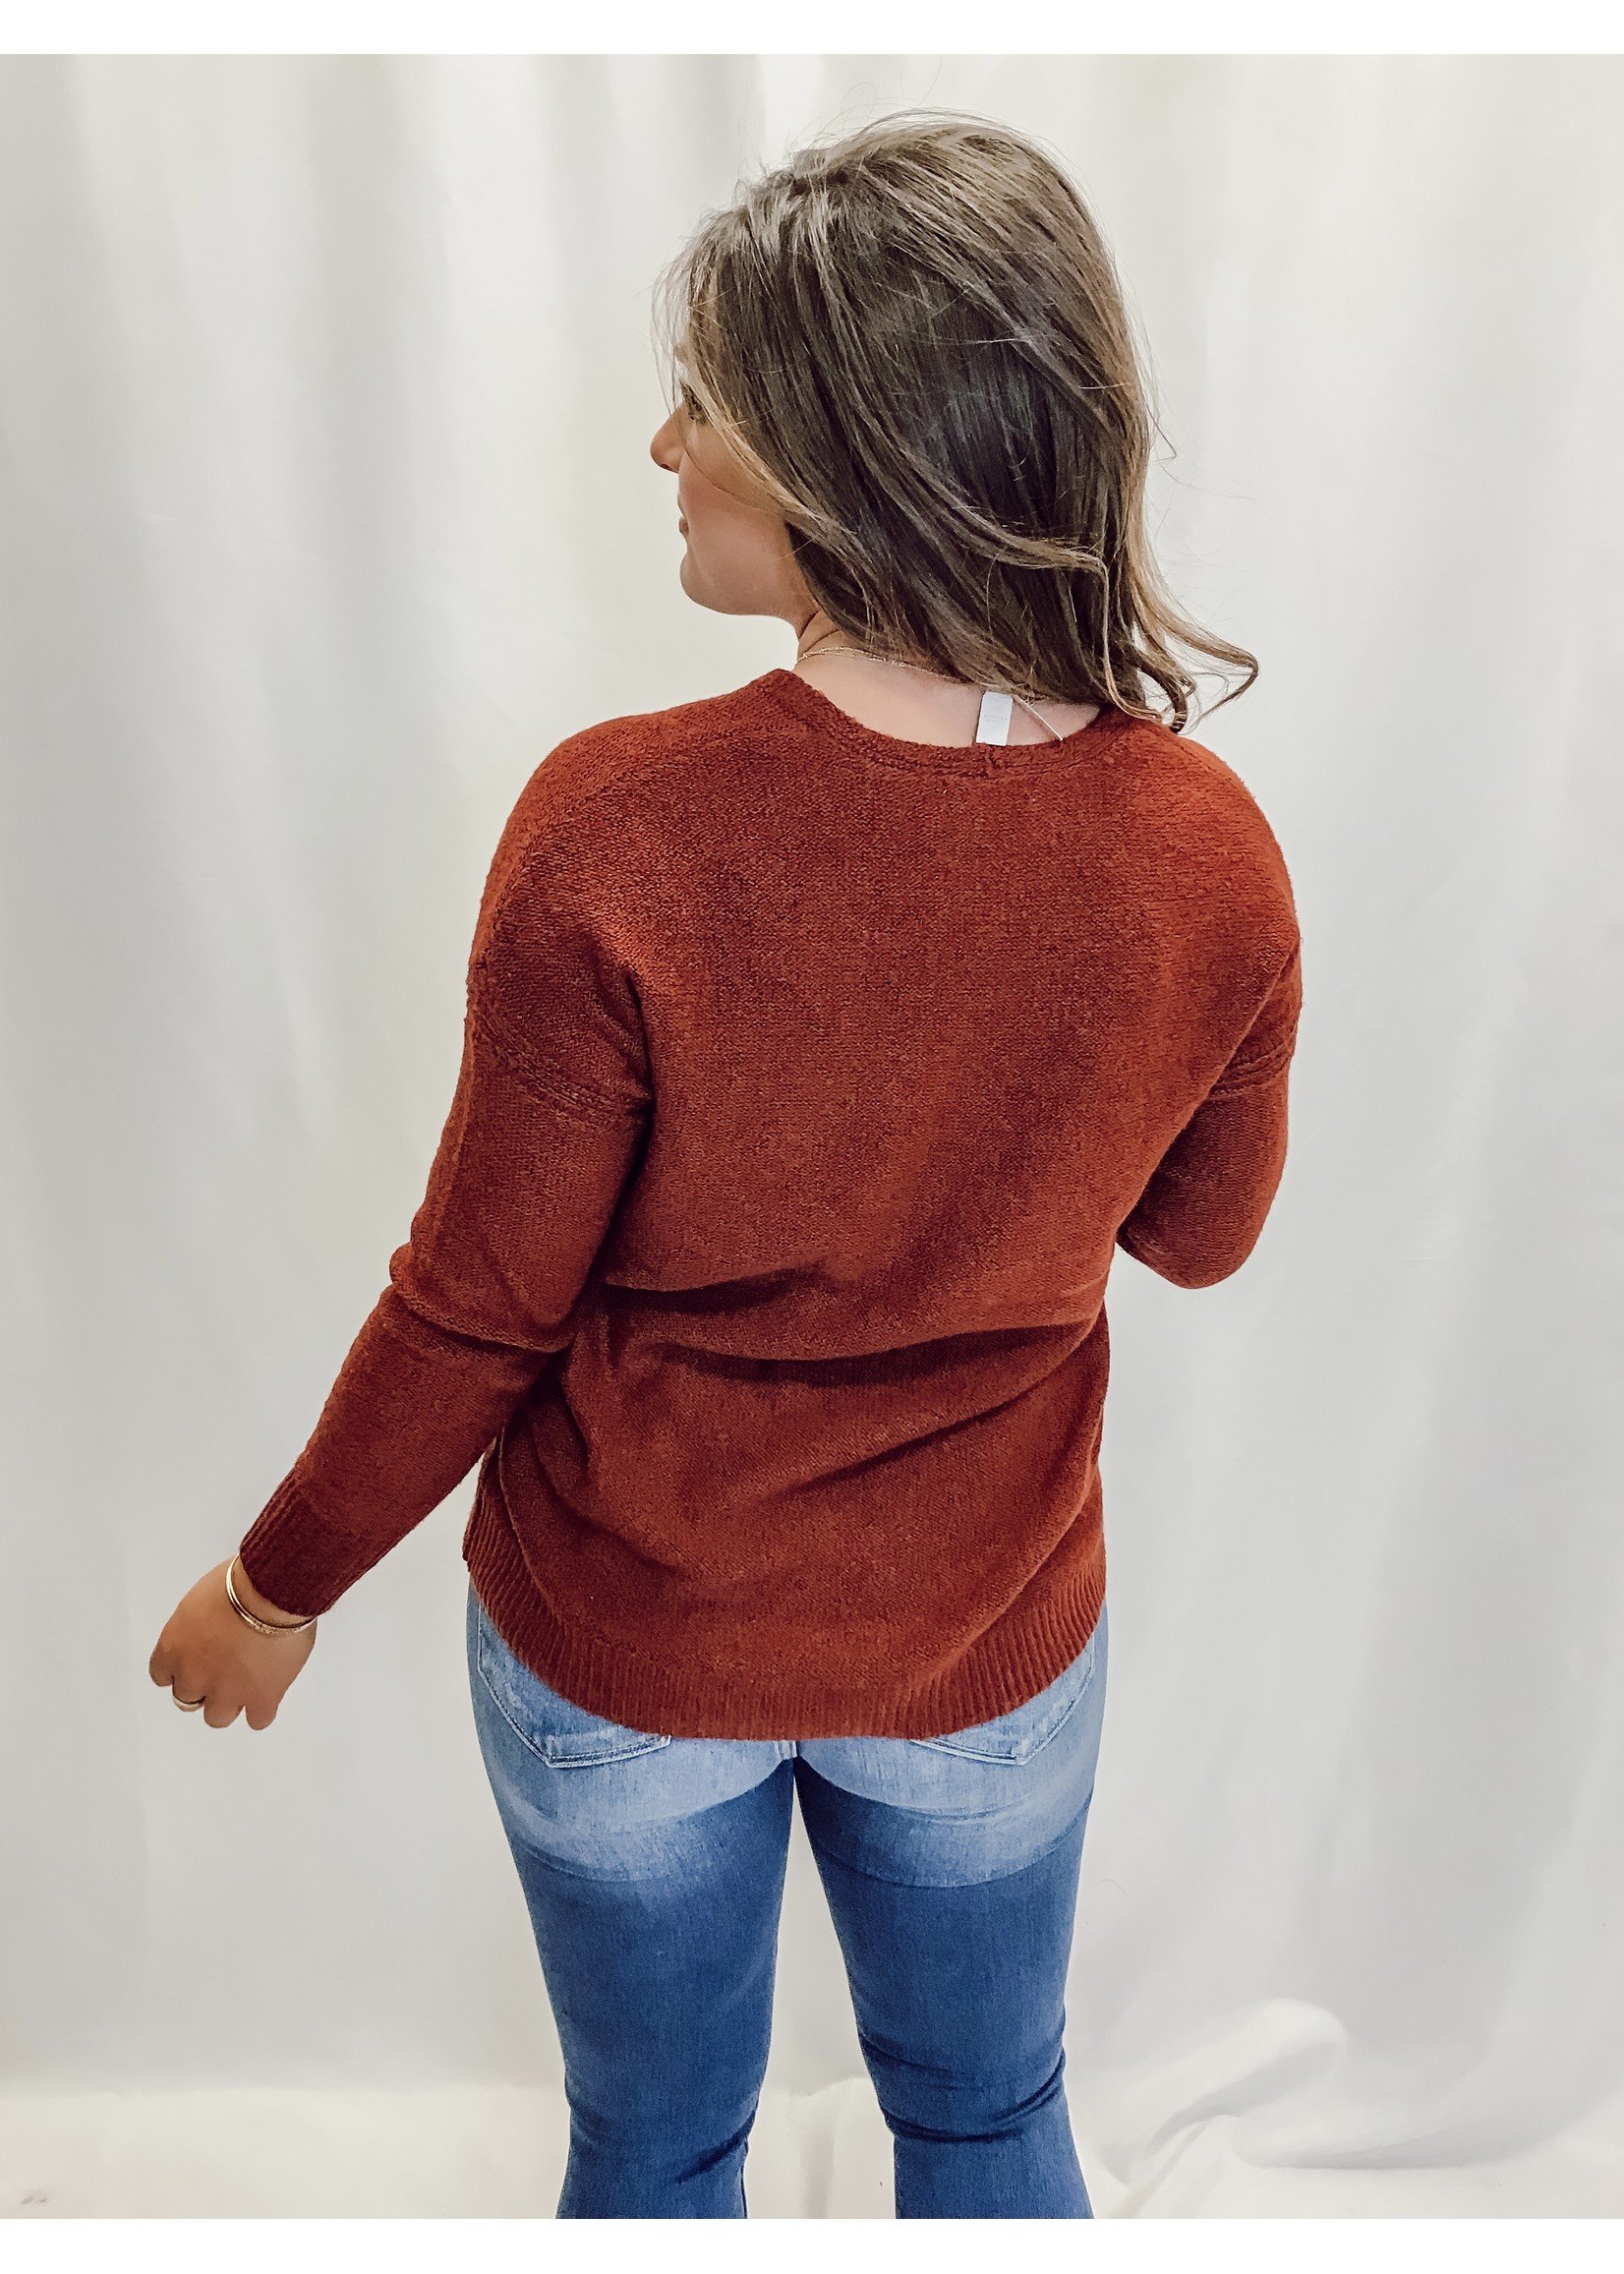 The Colby V-Neck Sweater